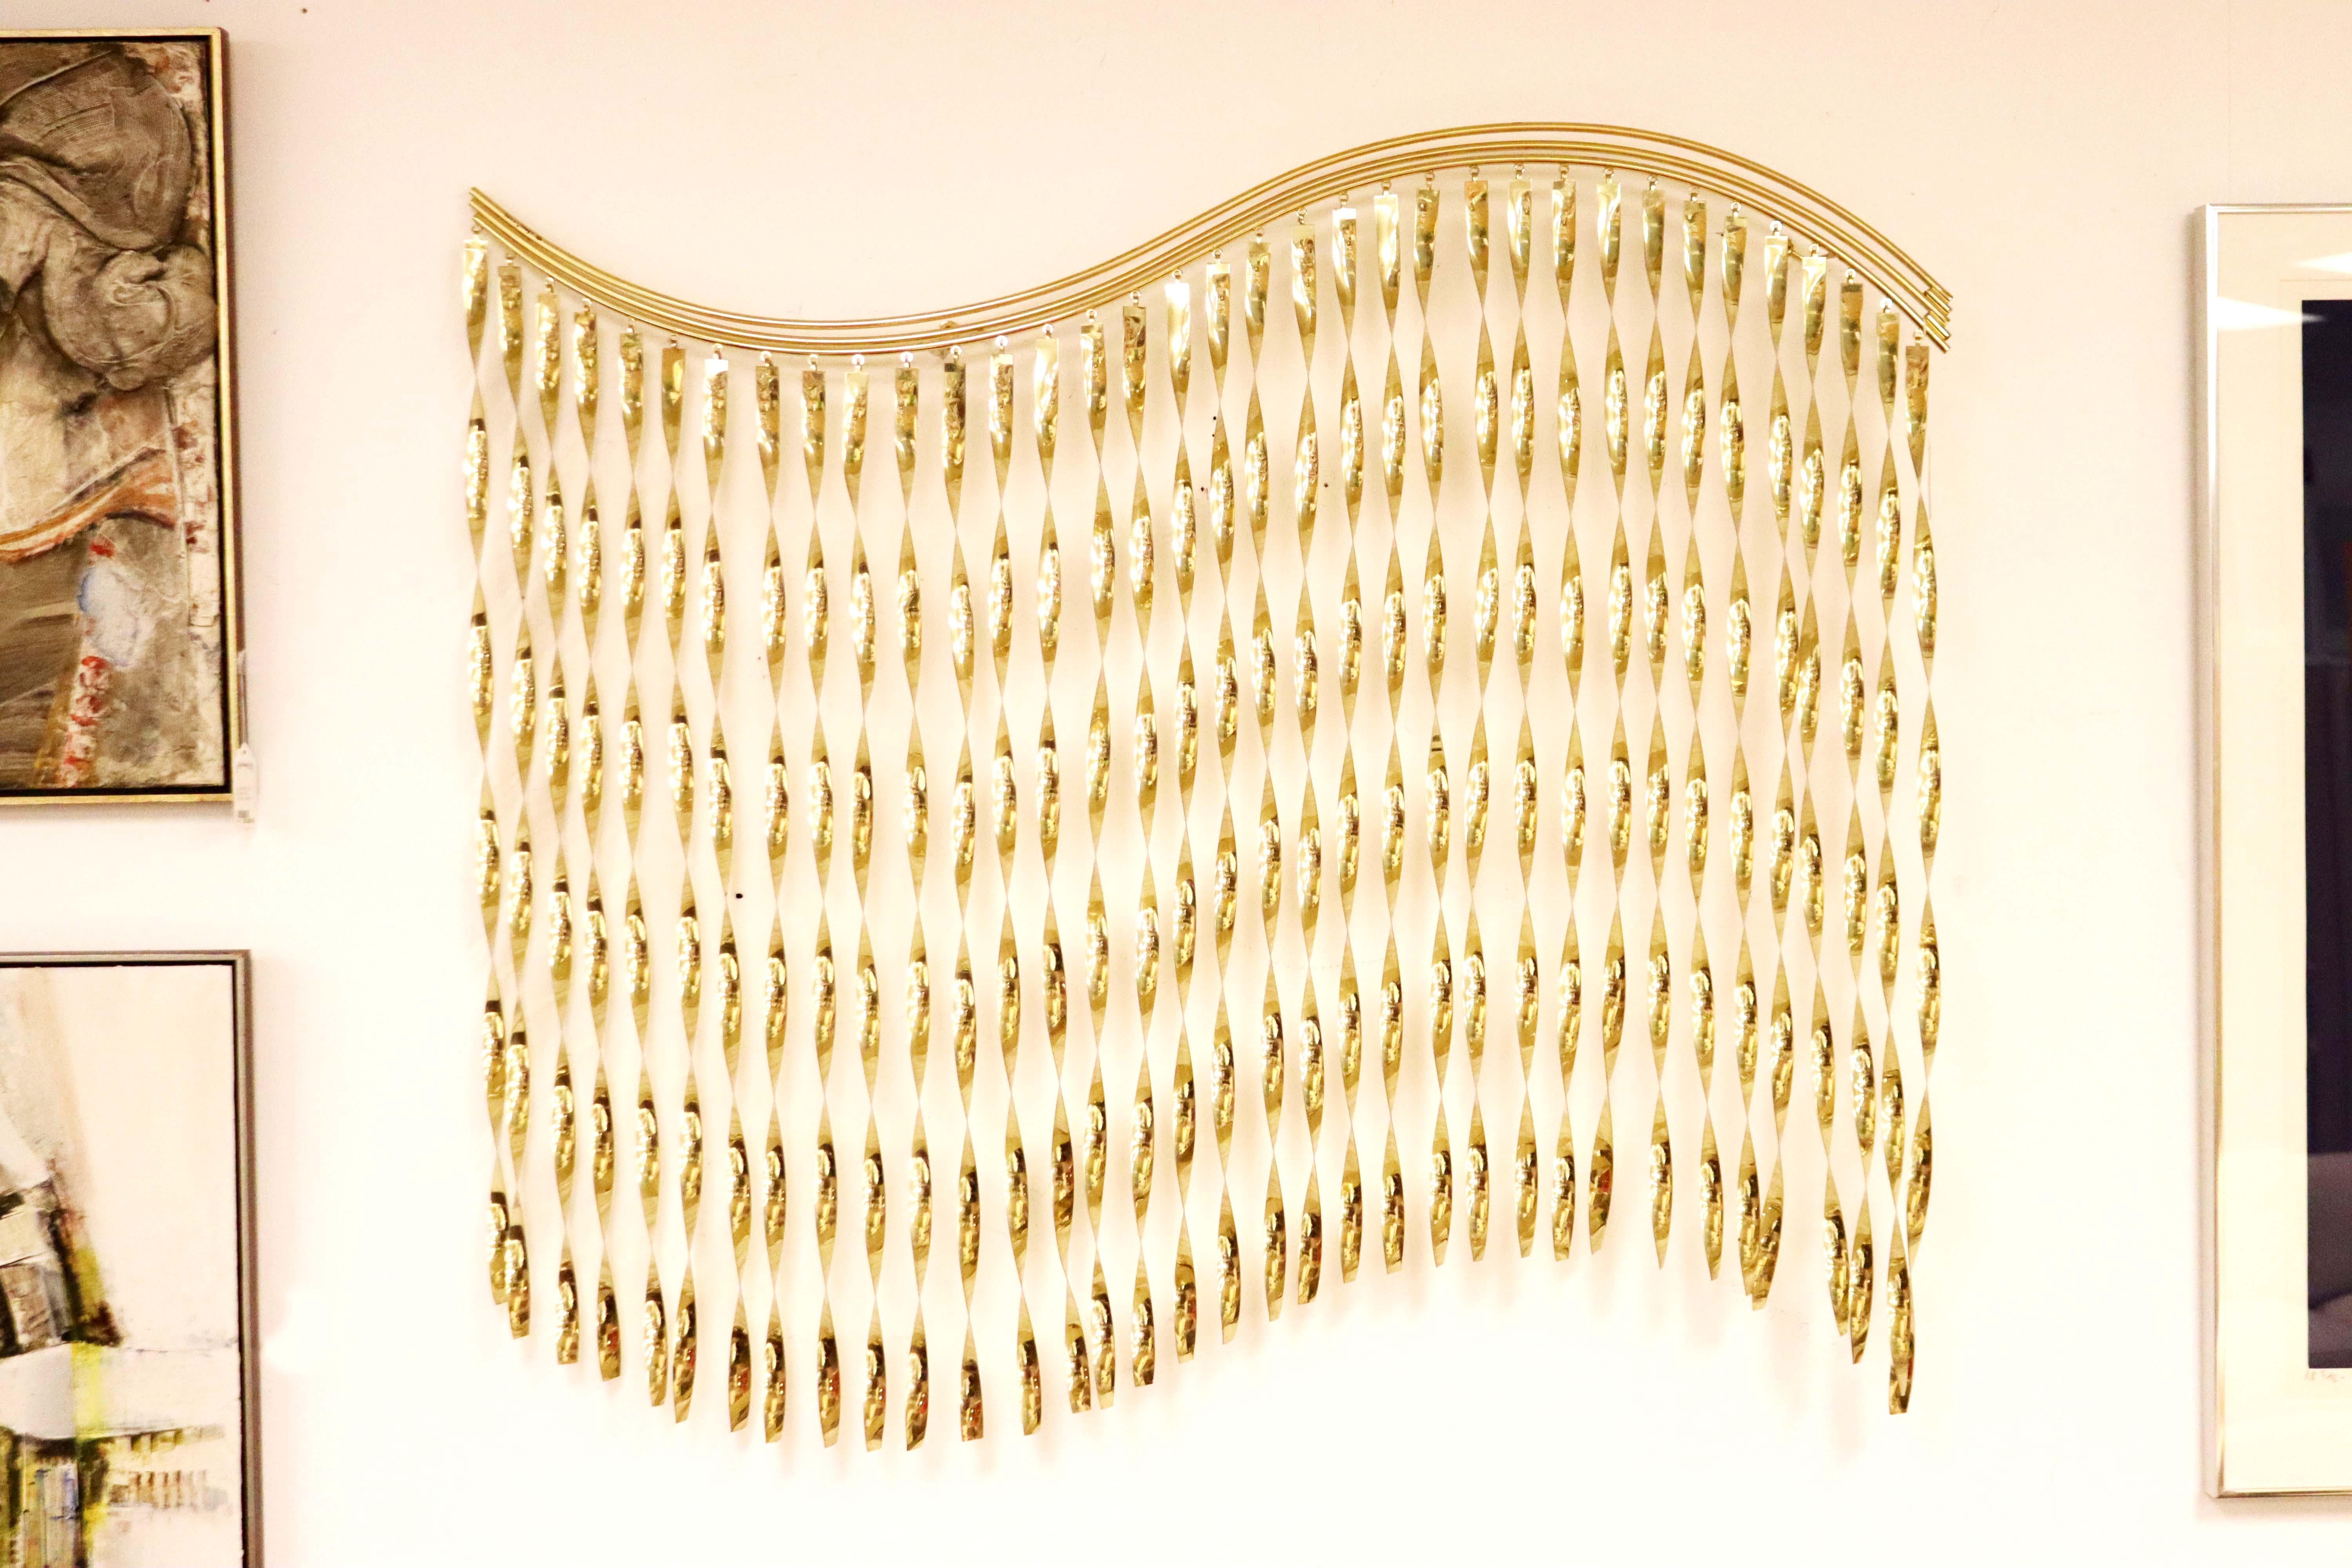 This iconic Curtis Jere kinetic wall sculpture is exemplary of their work and details a wave of flat, gold tone plated ribbons spiraling in undulating form. Magnificent and large scale, this piece measure 47W x 43H and 4D.

Well known to many for